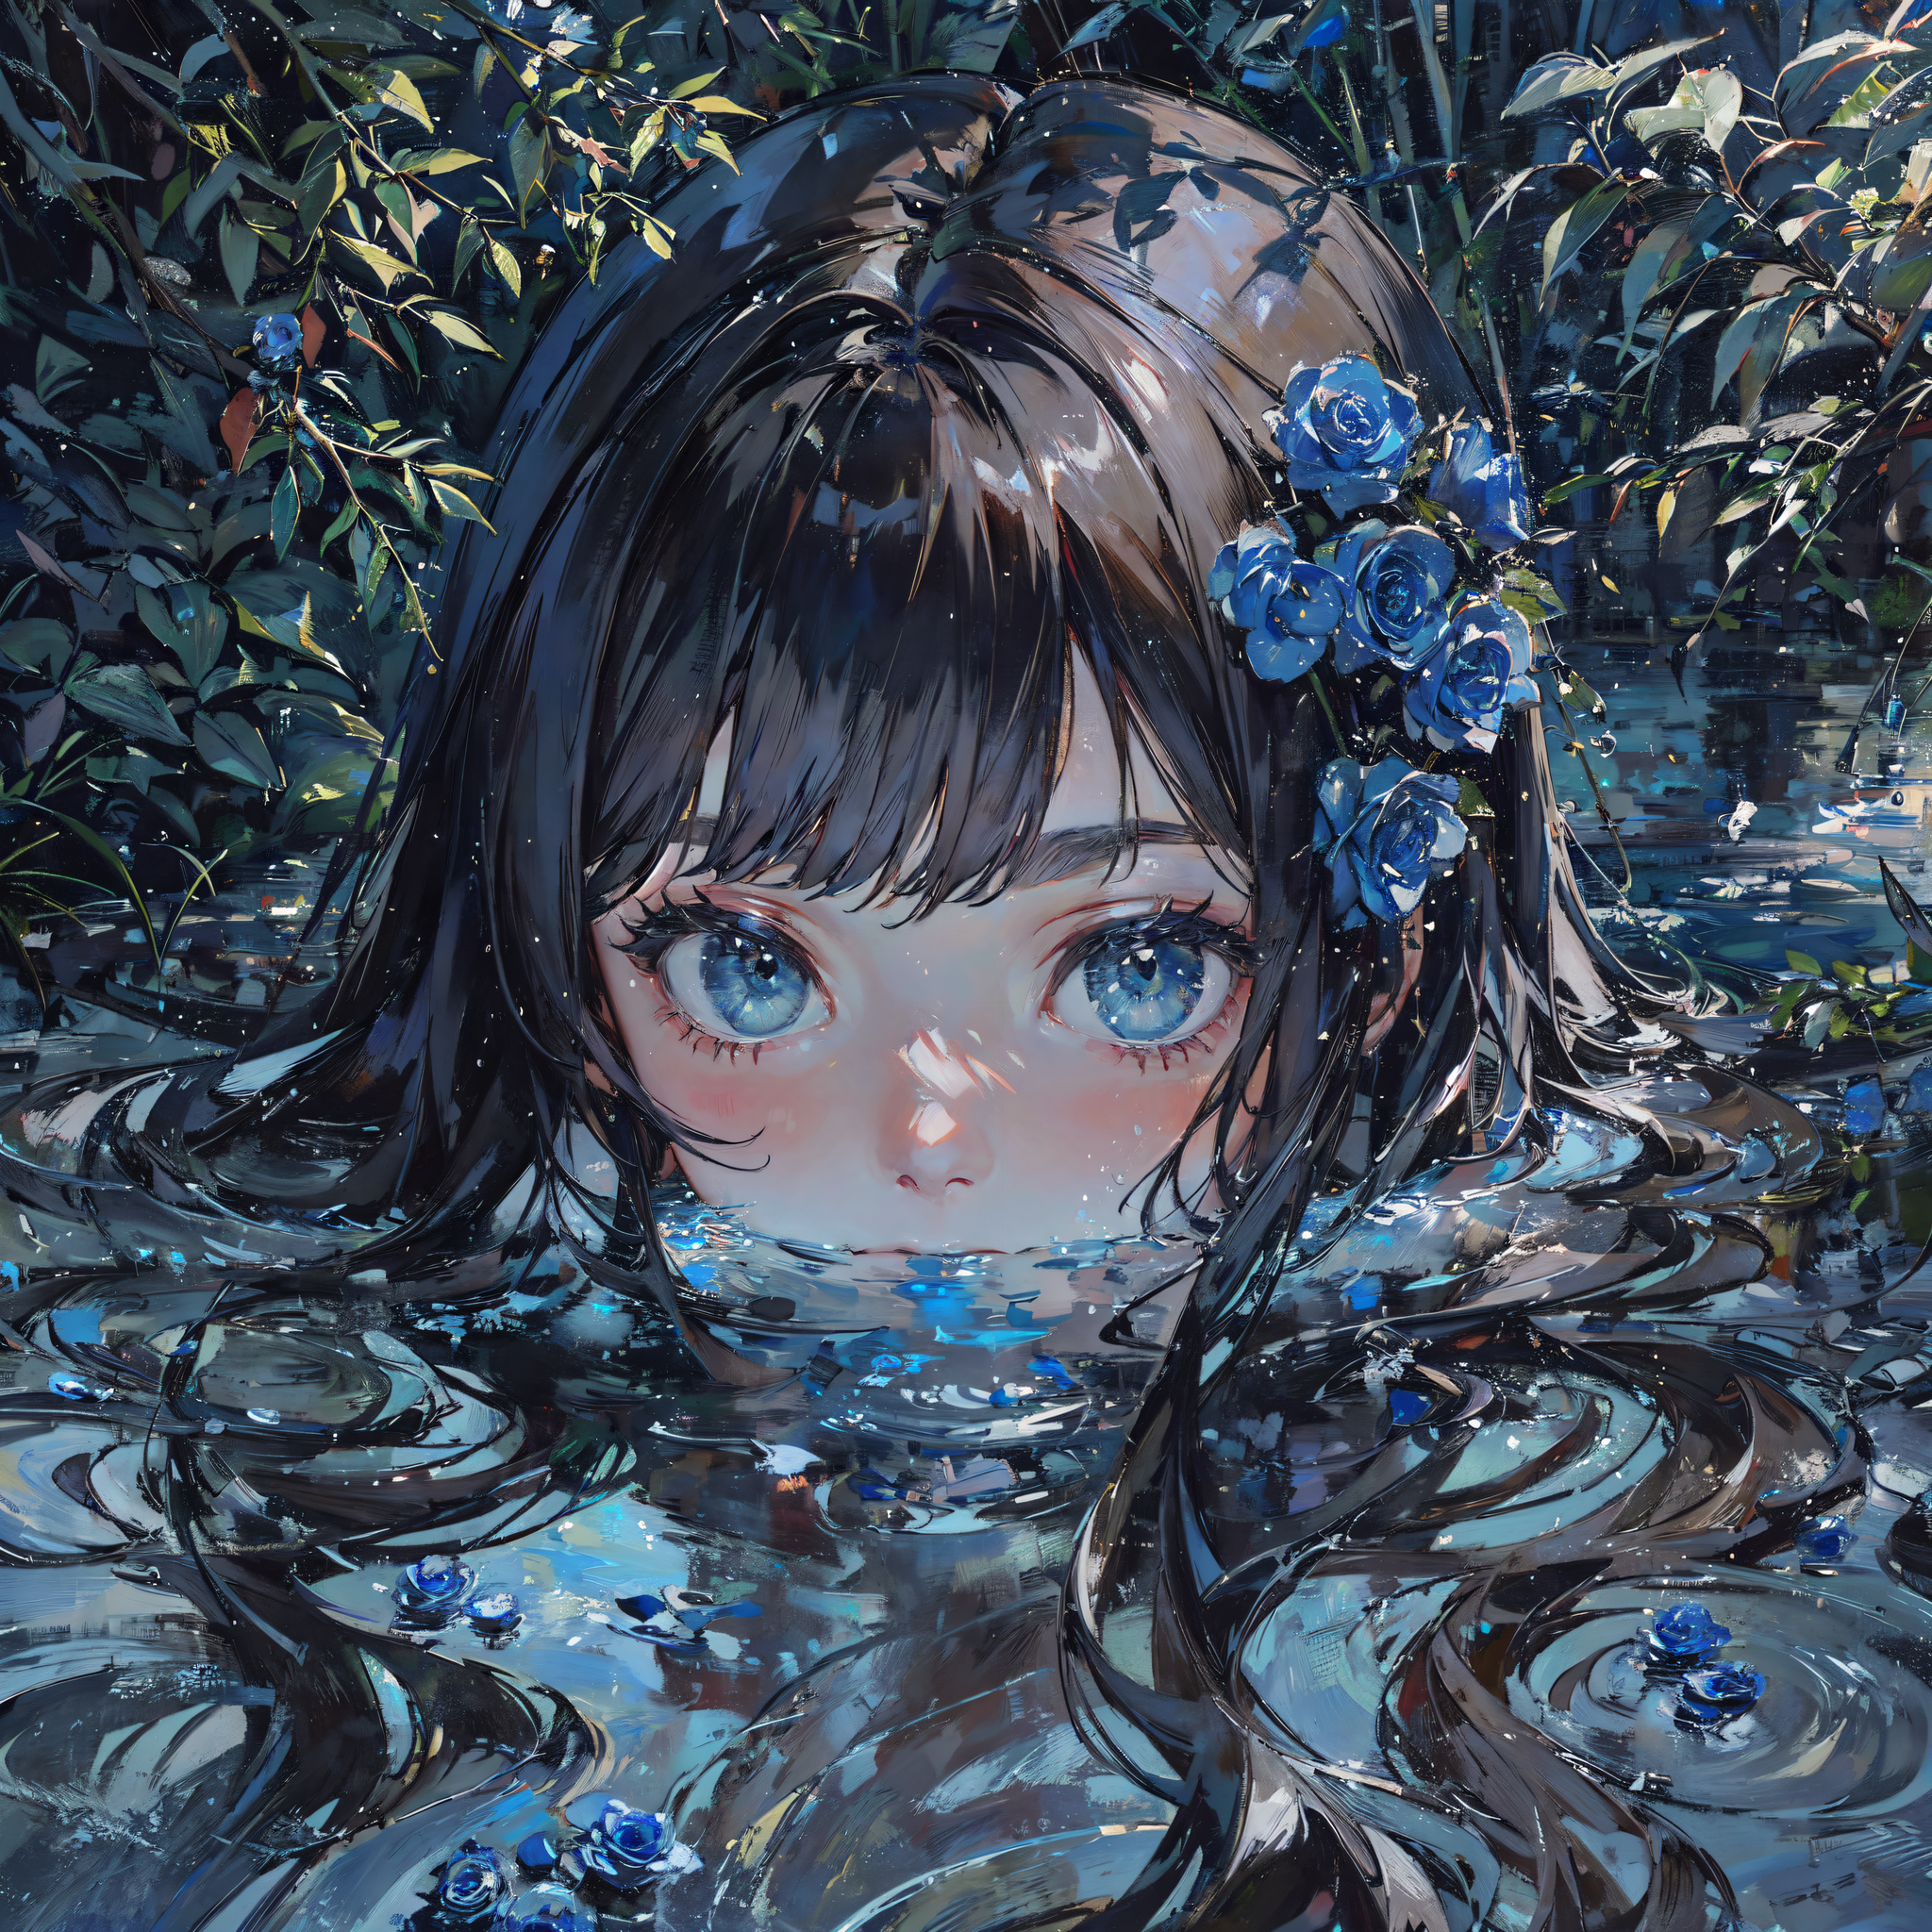 masterpiece, best quality, girl, long black hair, close-up, water, bushes, blue rose, completely blue,